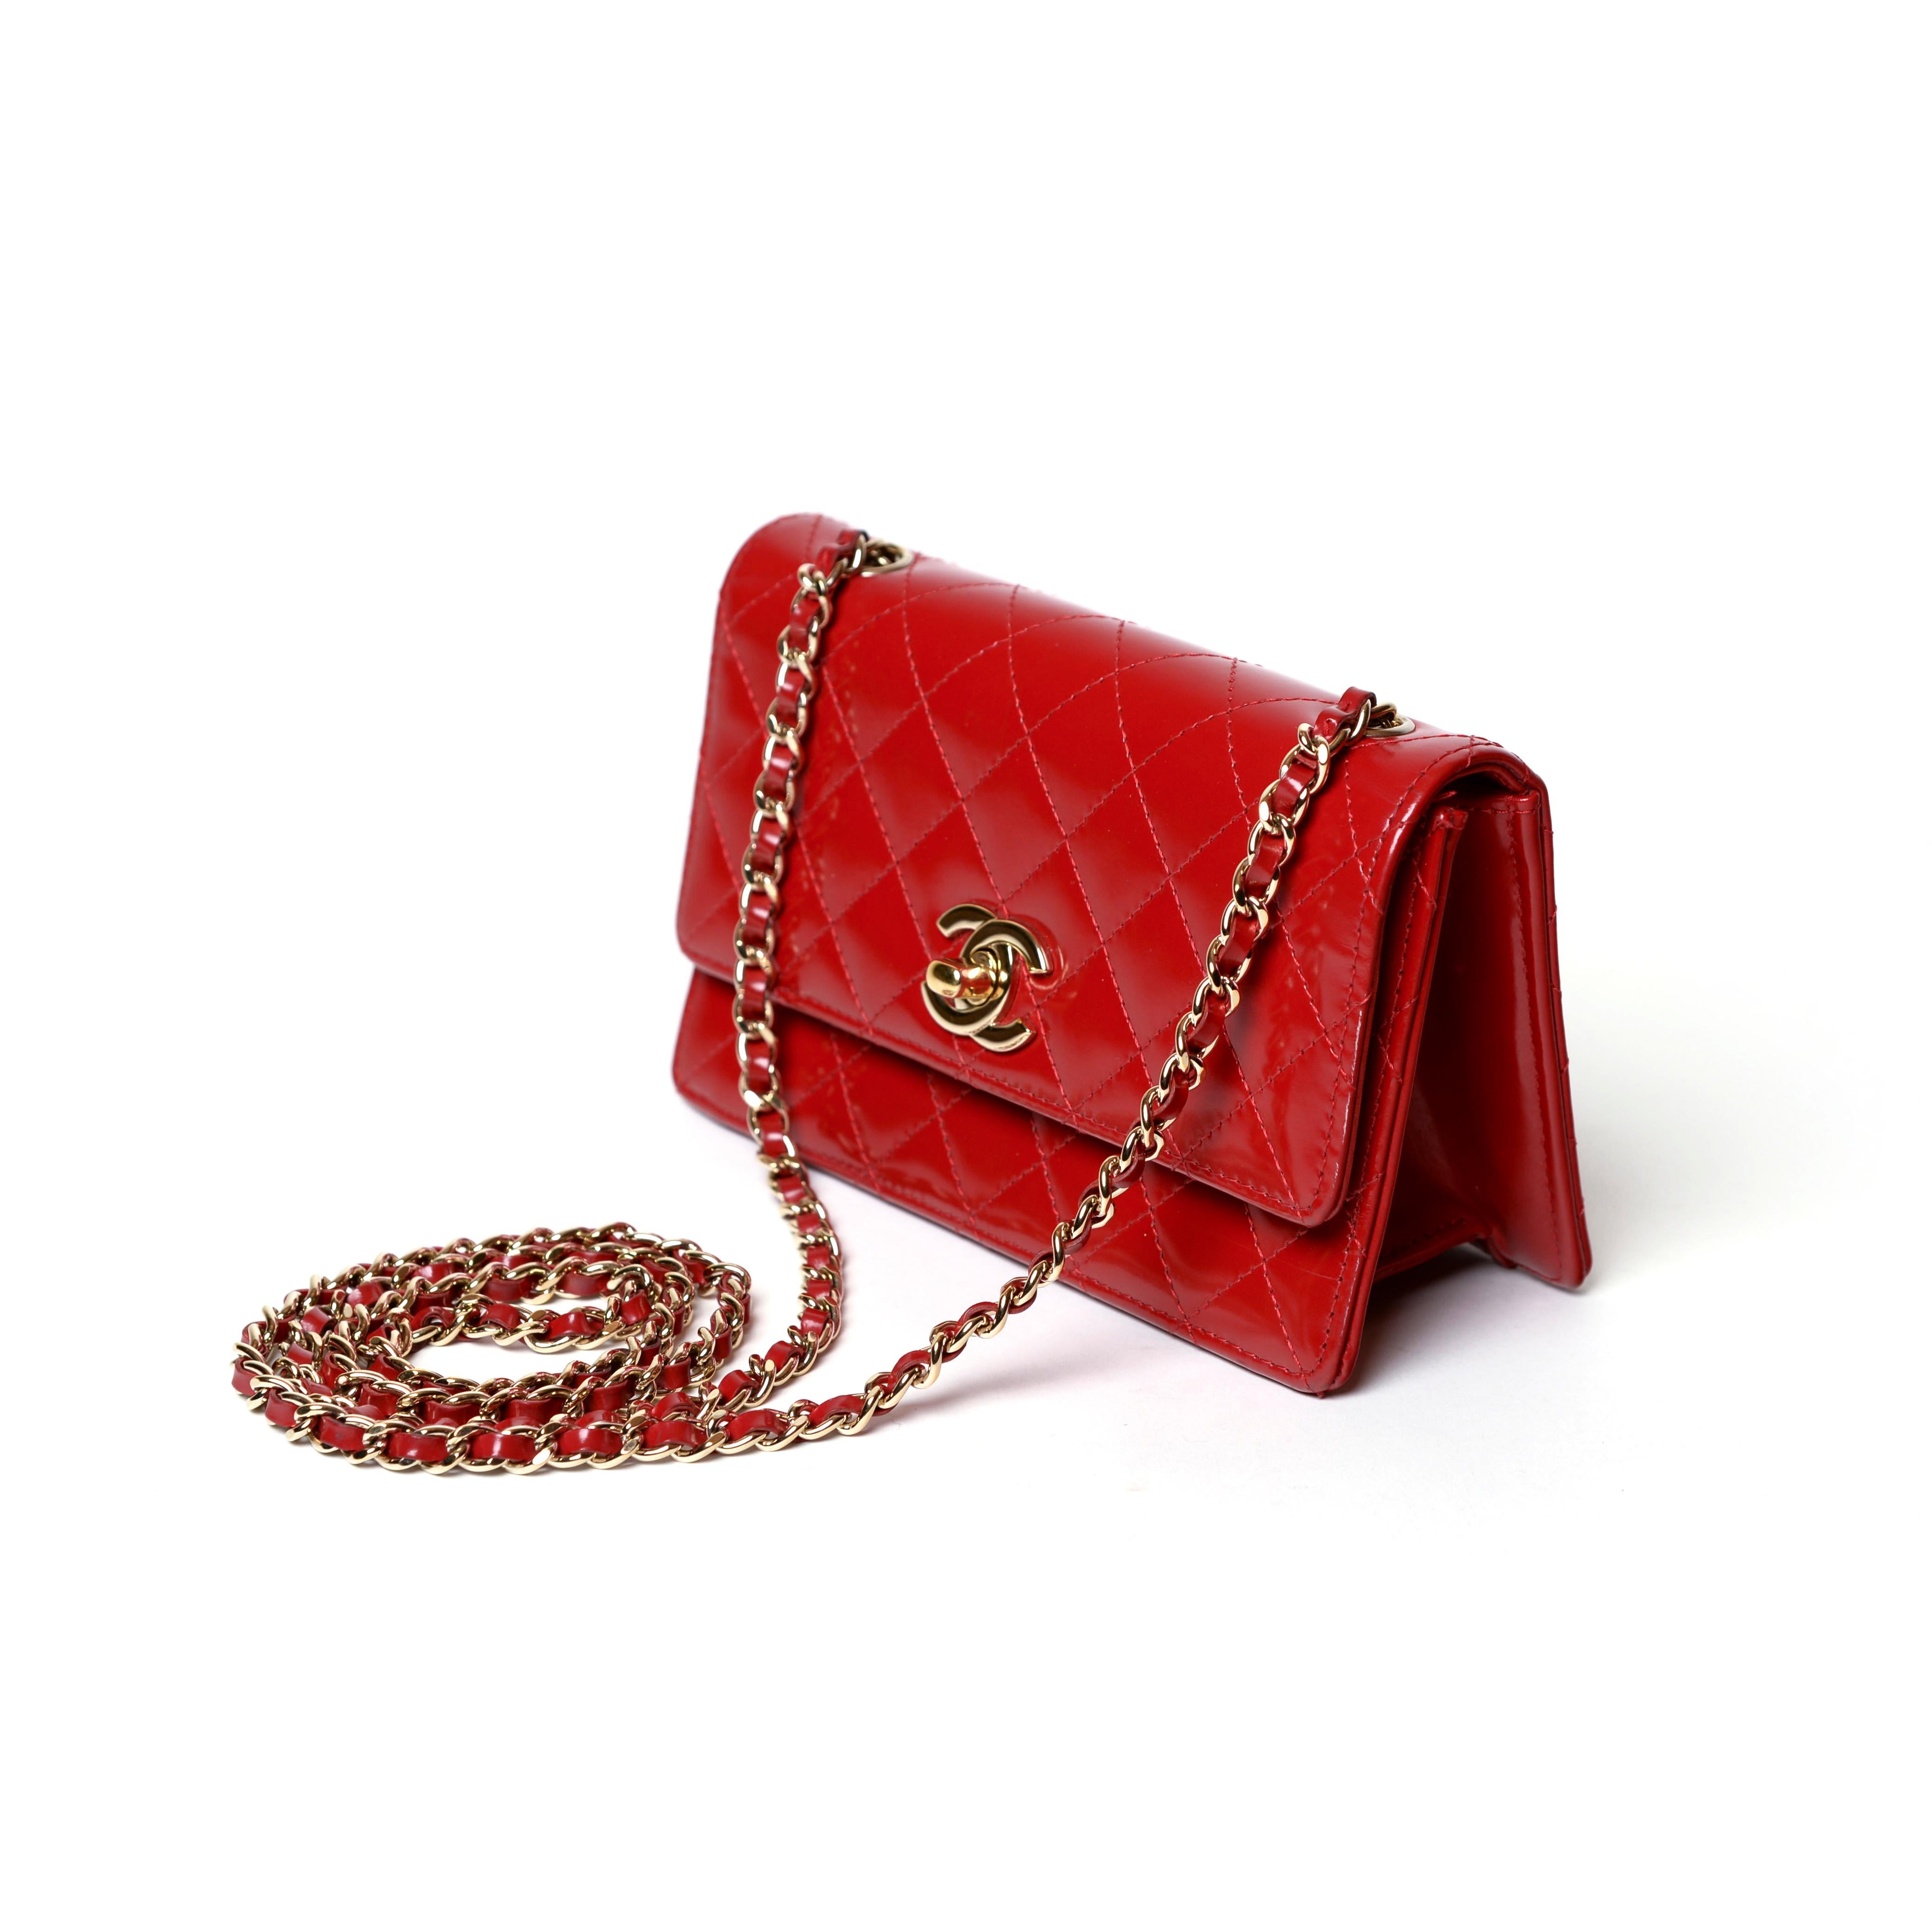 Chanel Classic Red Mini Flap Bag Patent Leather In Good Condition For Sale In Roosendaal, NL